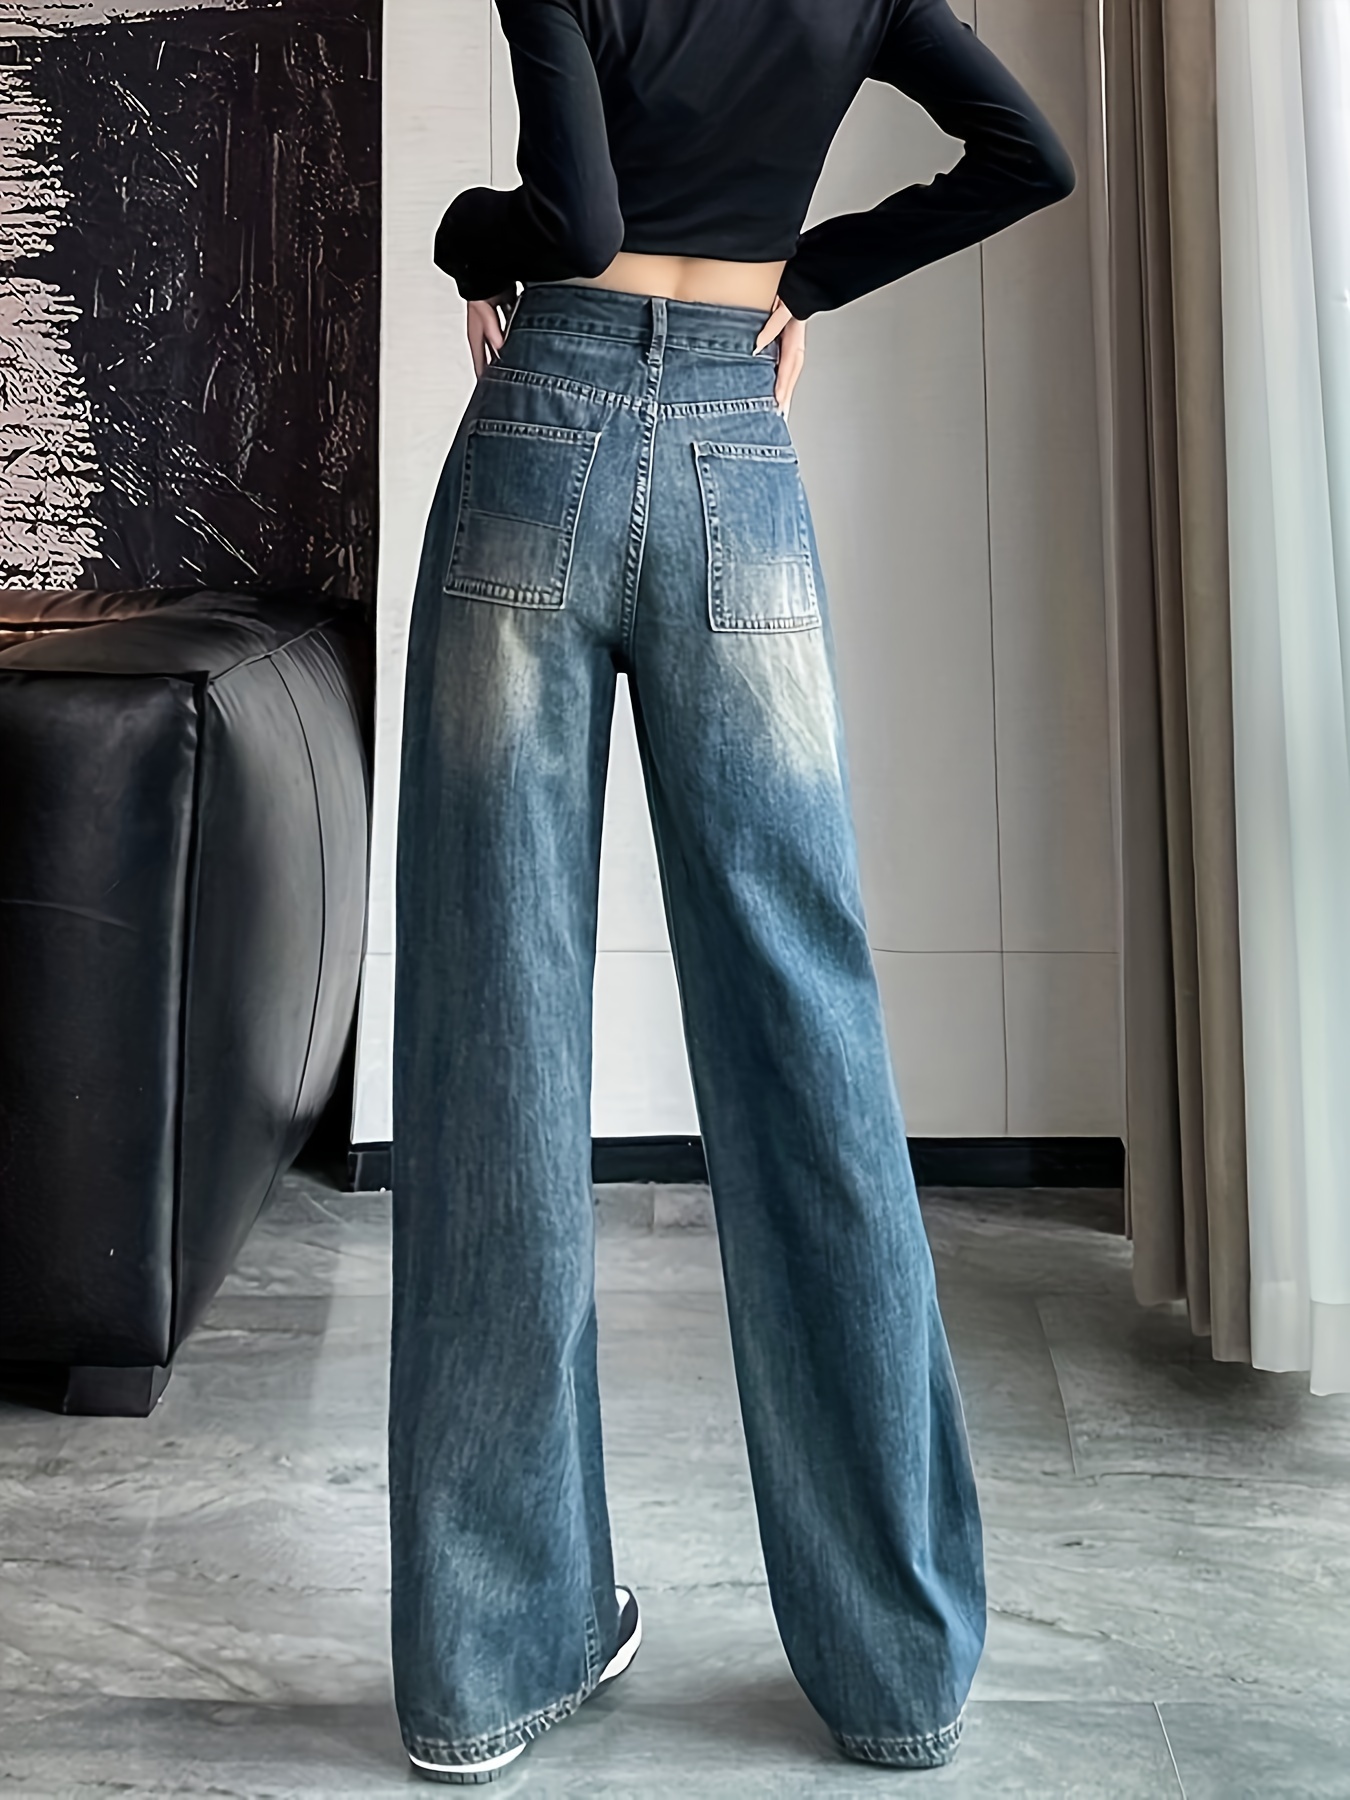 Plicated Pattern Bootcut Jeans, Star & Stripe Printed Patched Pocket Back  Casual Denim Pants, Women's Denim Jeans & Clothing